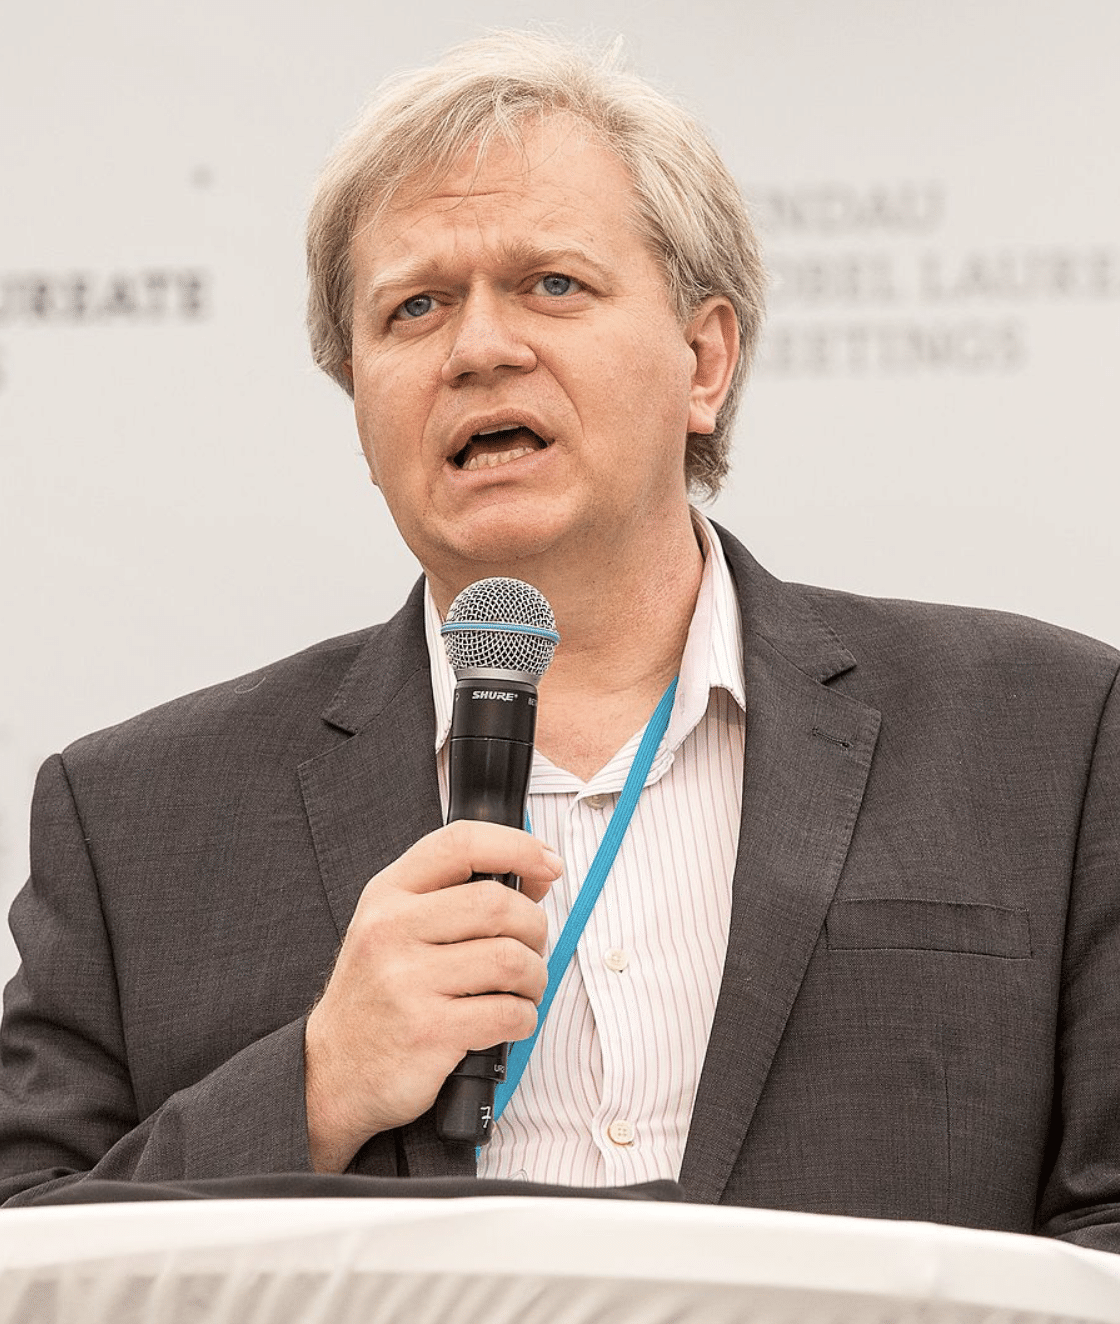 Nobel laureate Brian Schmidt reading the Mainau Declaration 2015 on Climate Change on Mainau Island, Germany on the closing day of the 65th Lindau Nobel Laureate Meeting. | Credit: Vincenzo108 | CC BY-SA 4.0